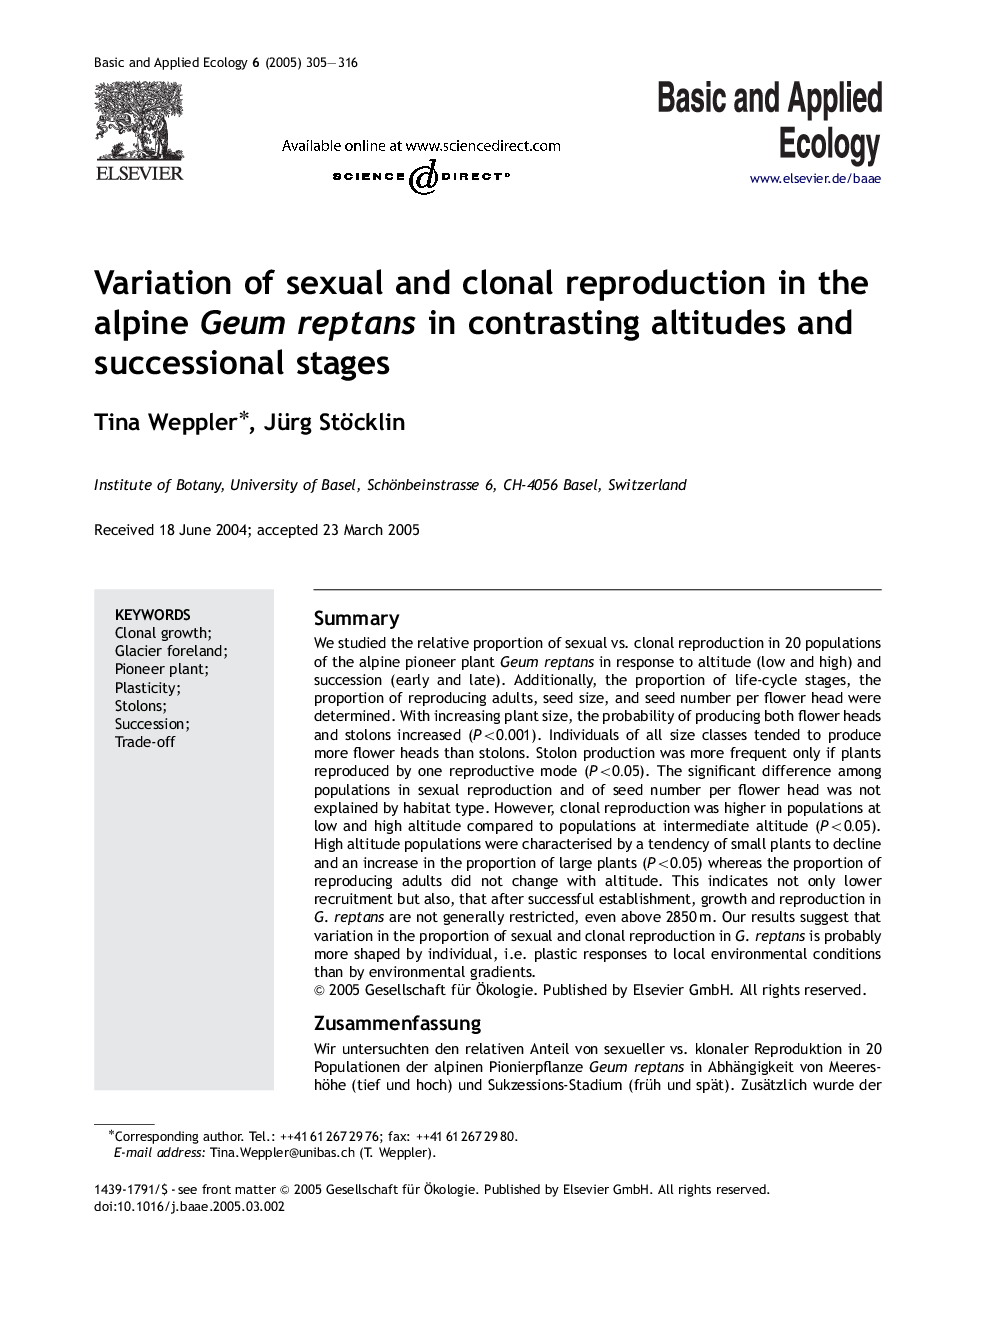 Variation of sexual and clonal reproduction in the alpine Geum reptans in contrasting altitudes and successional stages